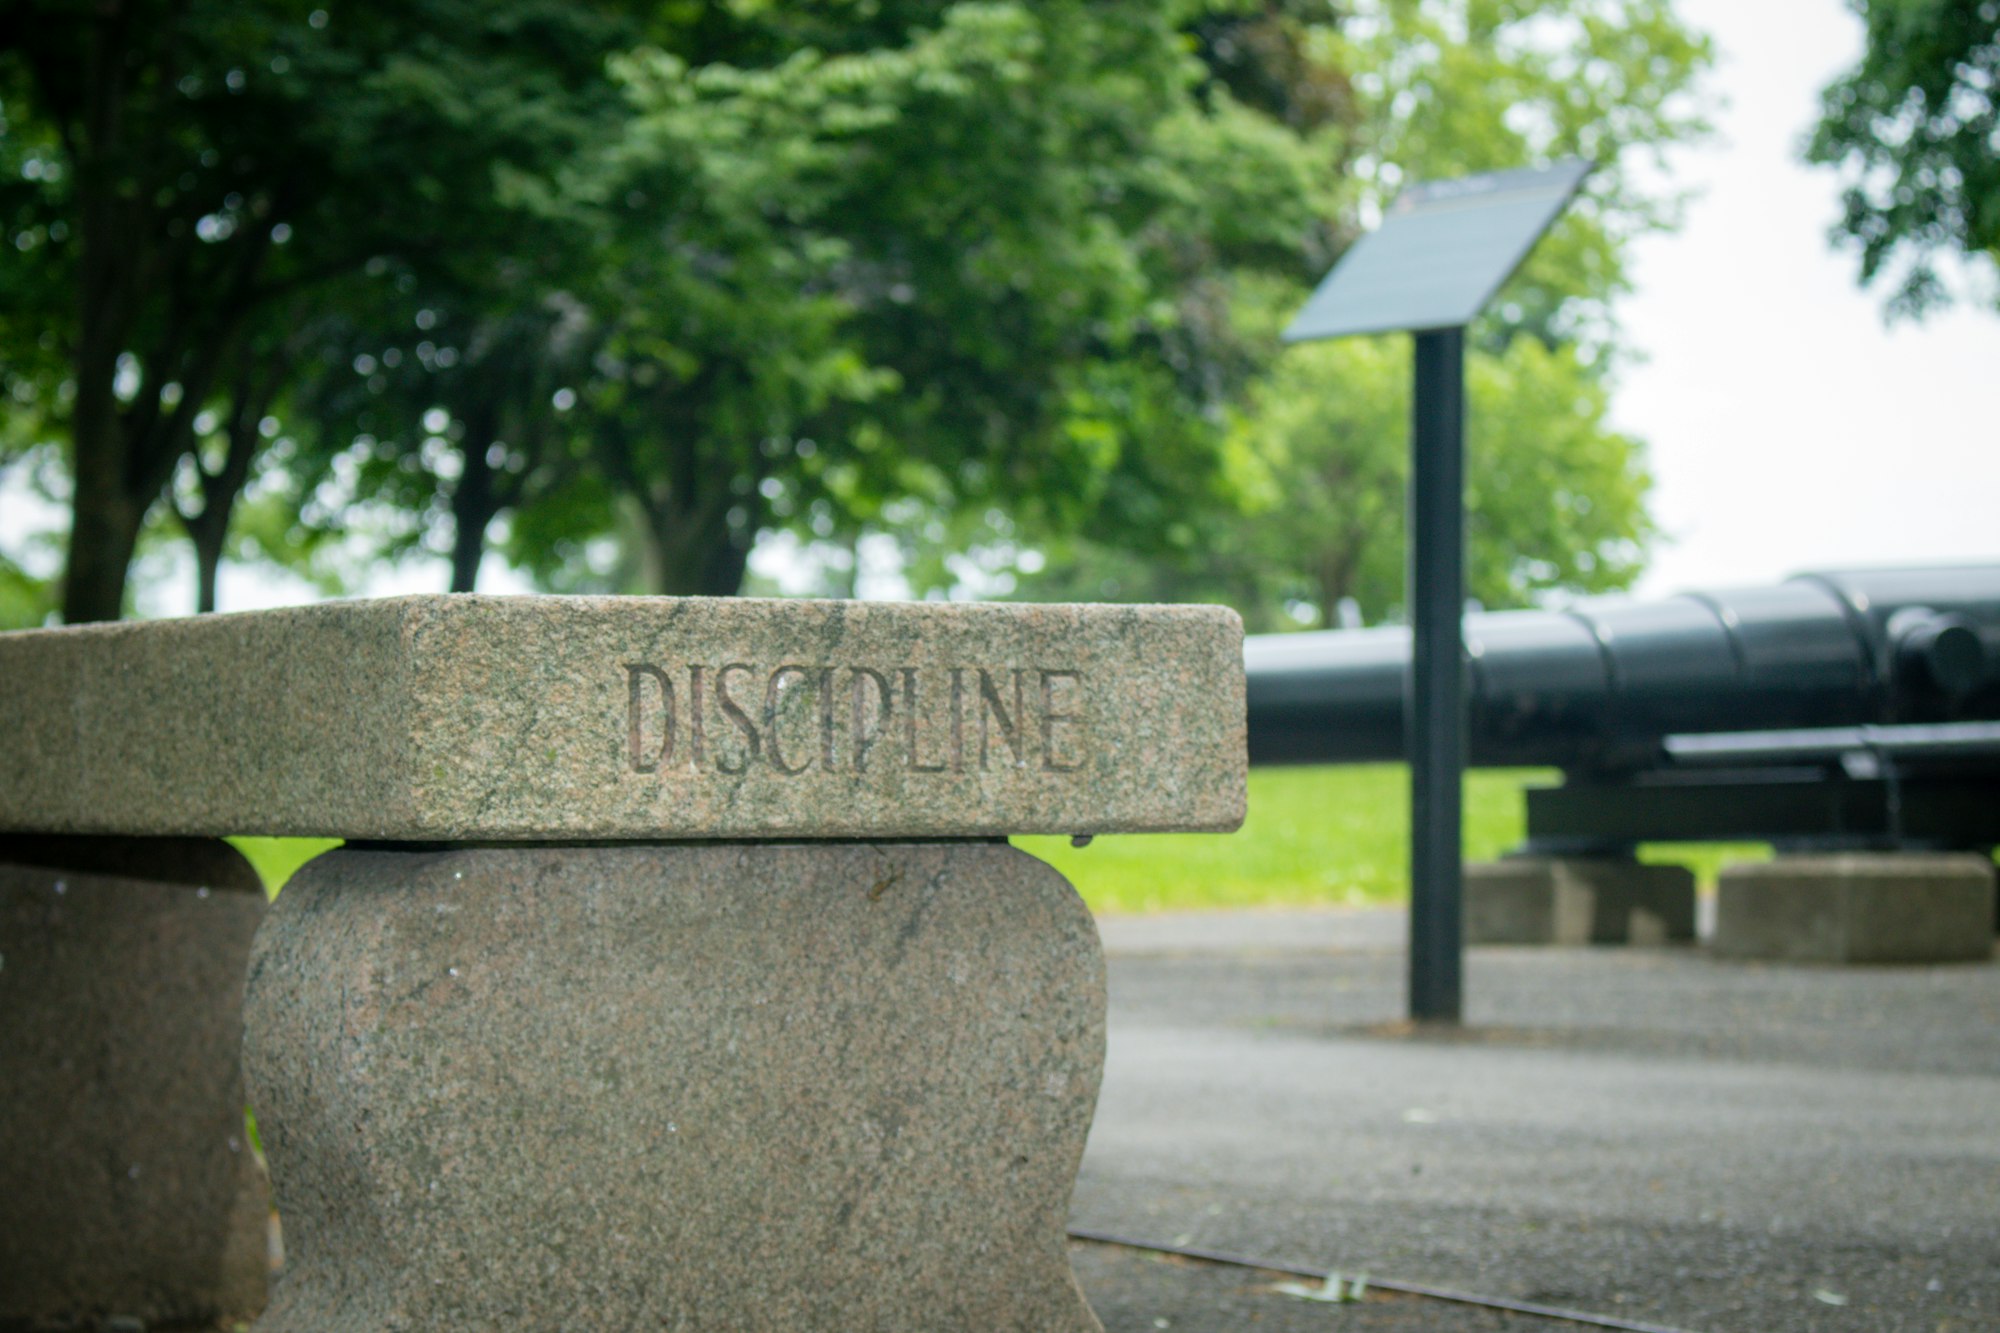 "Discipline" bench - Trophy Point at the United States Military Academy at West Point